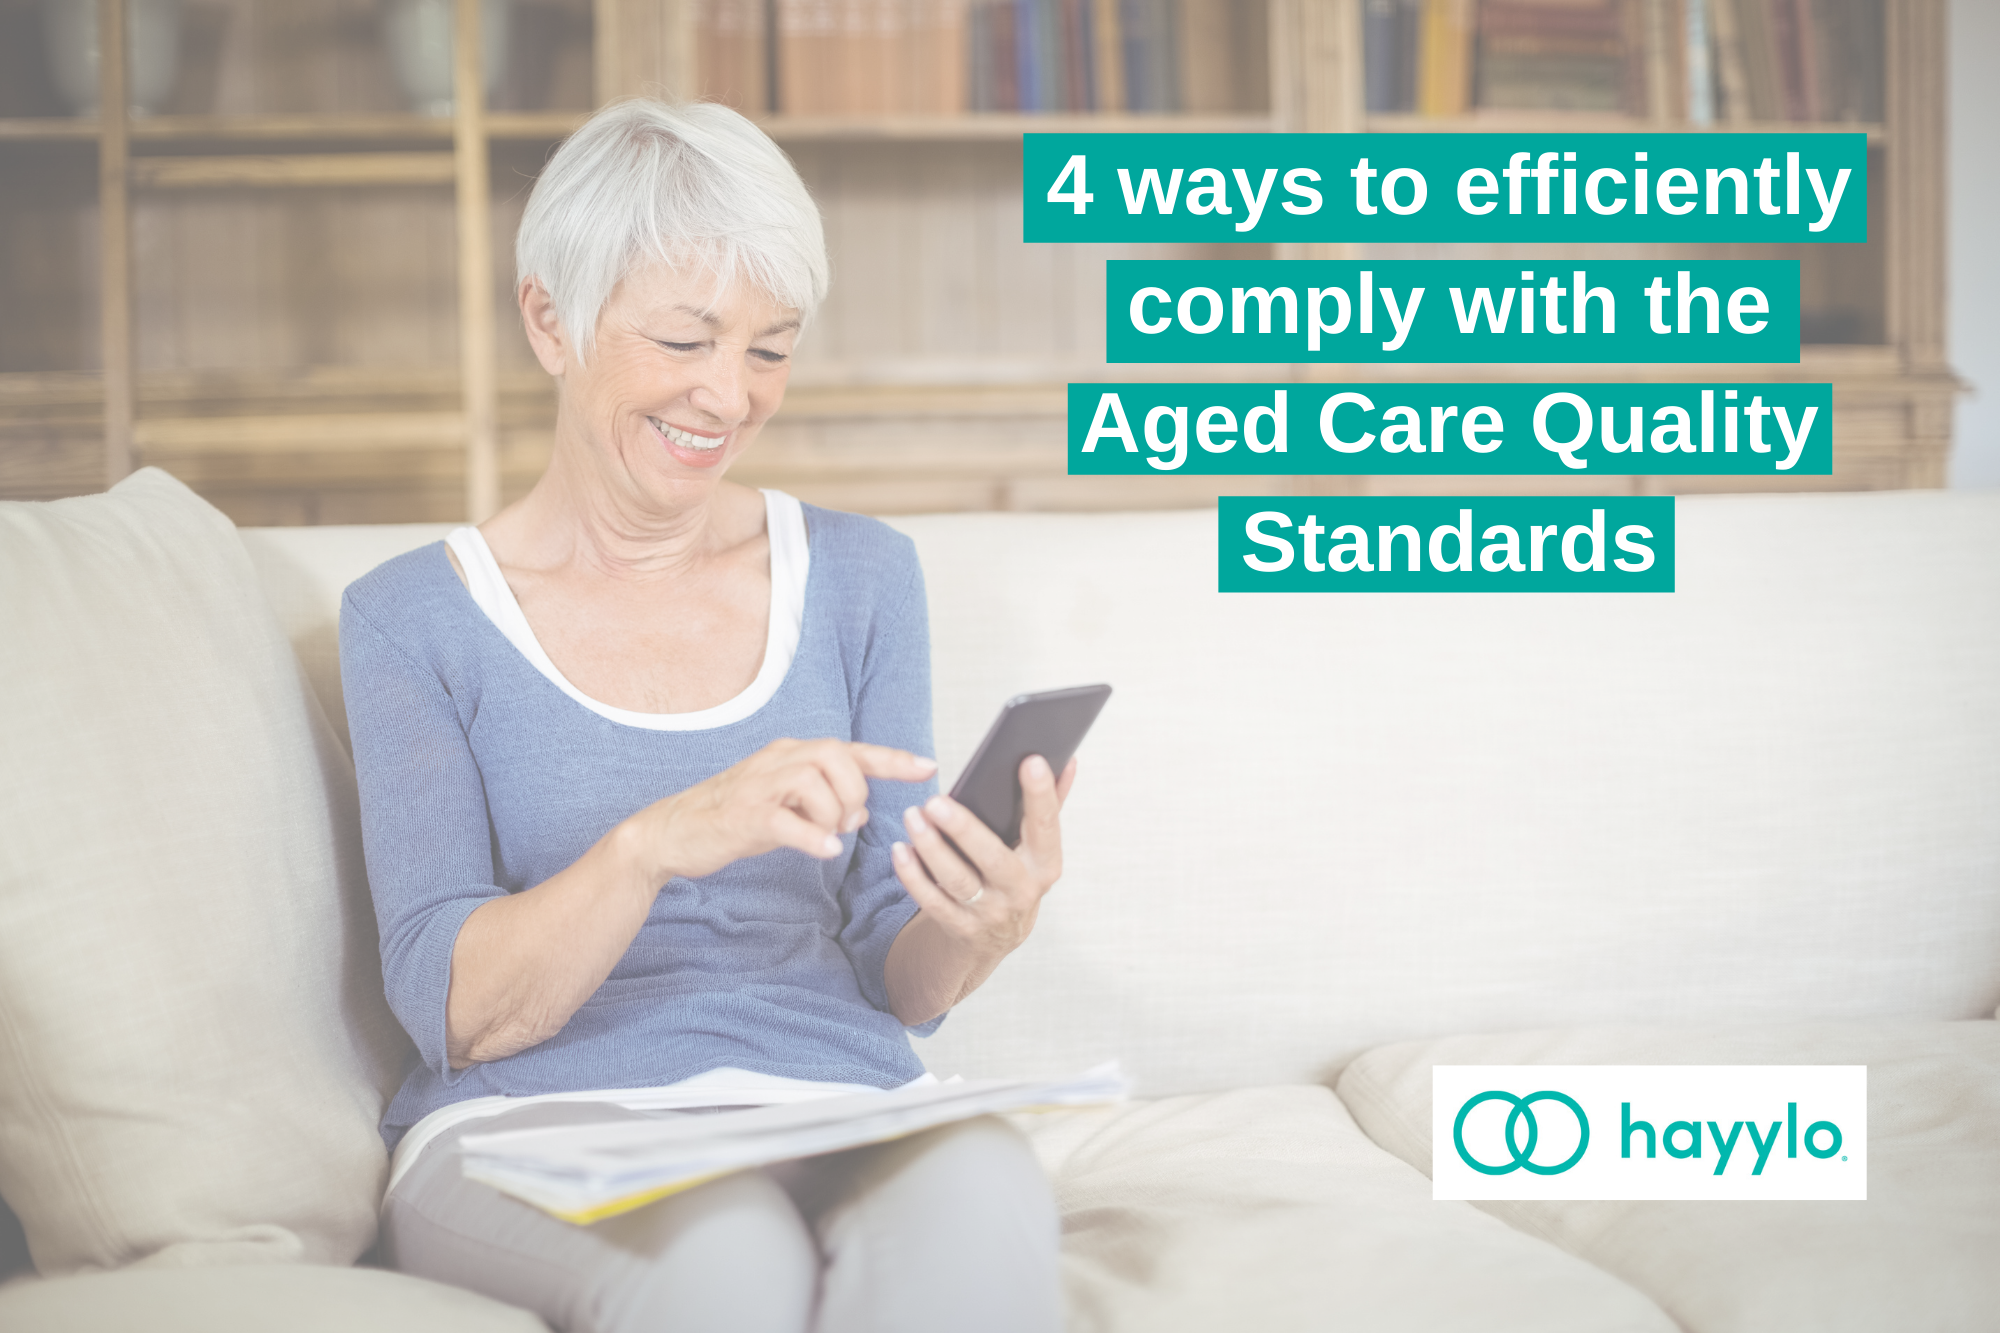 4 ways to comply with the aged care quality standards